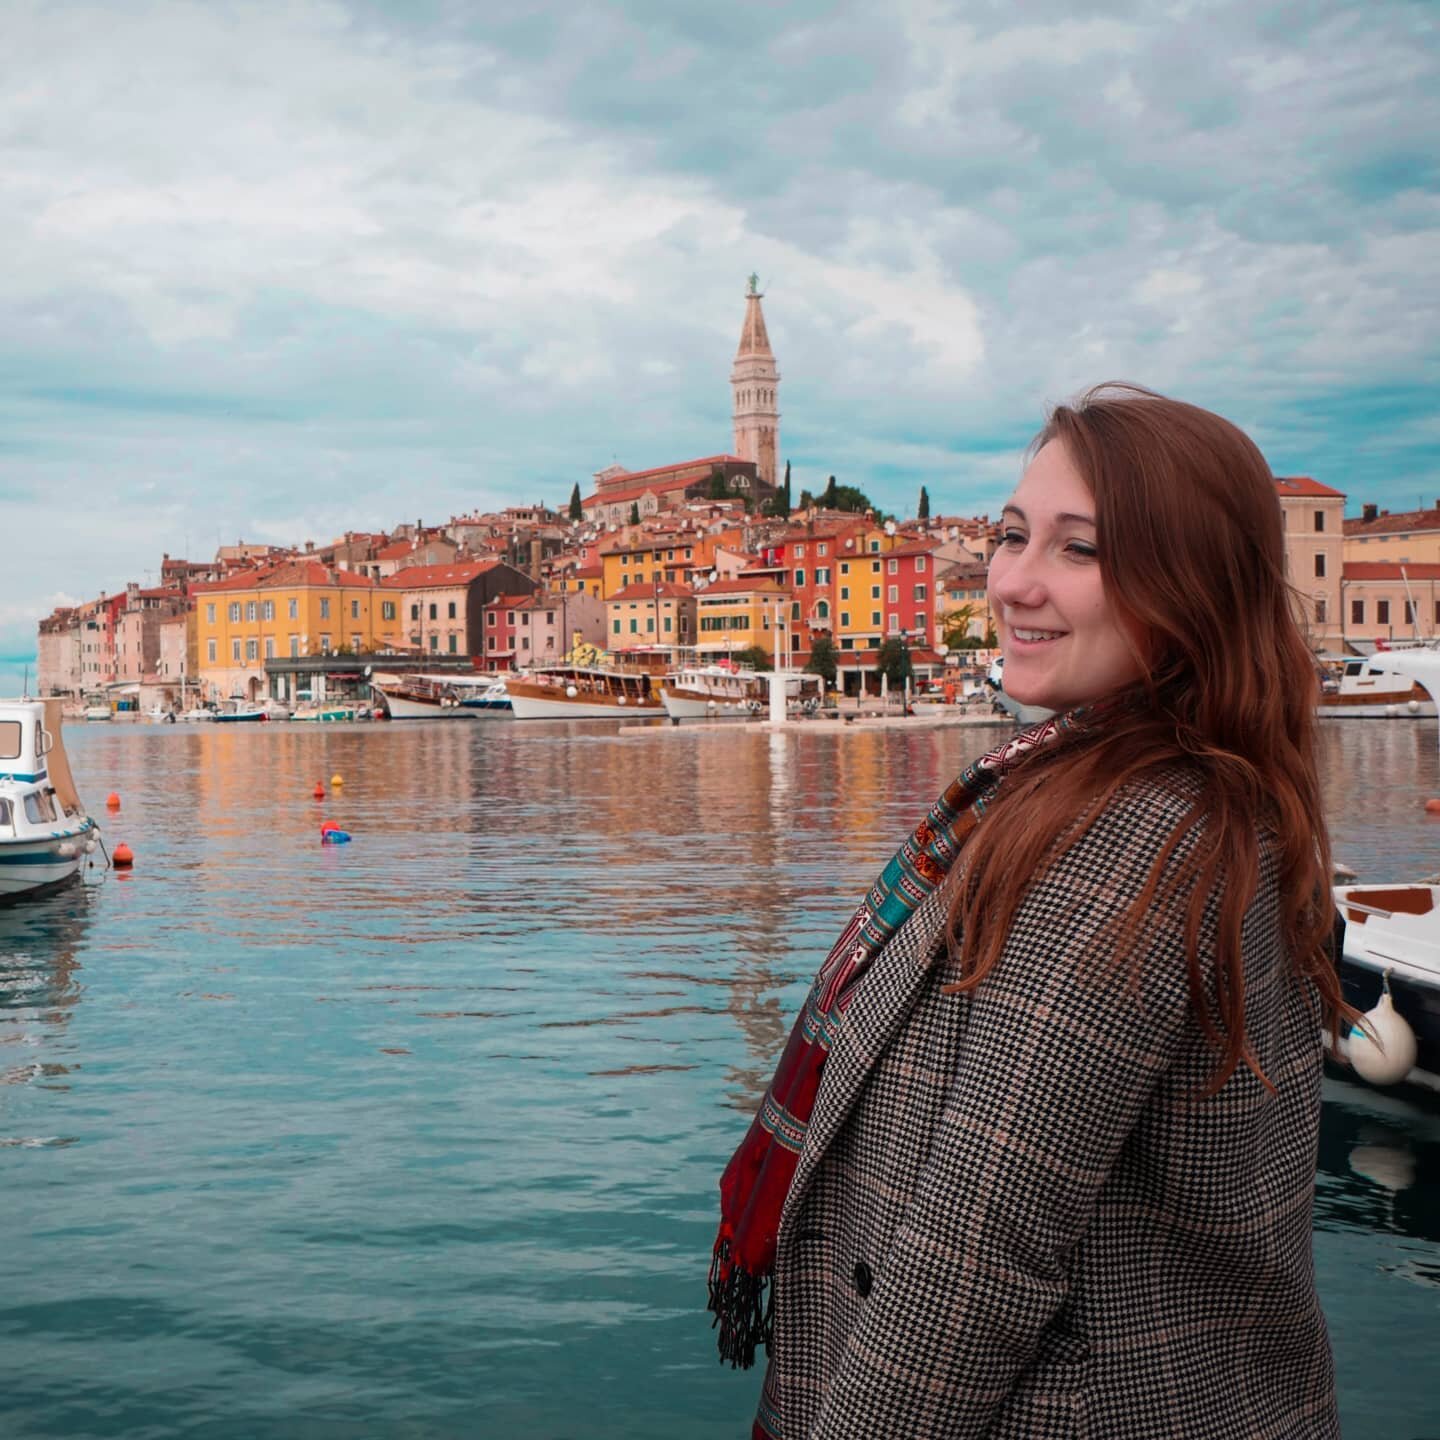 Morning in Rovinj 🇭🇷
. 
🇬🇧 Back to our road trip in Croatia, which occurred last October! Rovinj is also called the Venice of Croatia thanks to its Venetian atmosphere. It has been labeled as the most romantic city of Istria province. 
.
What do 